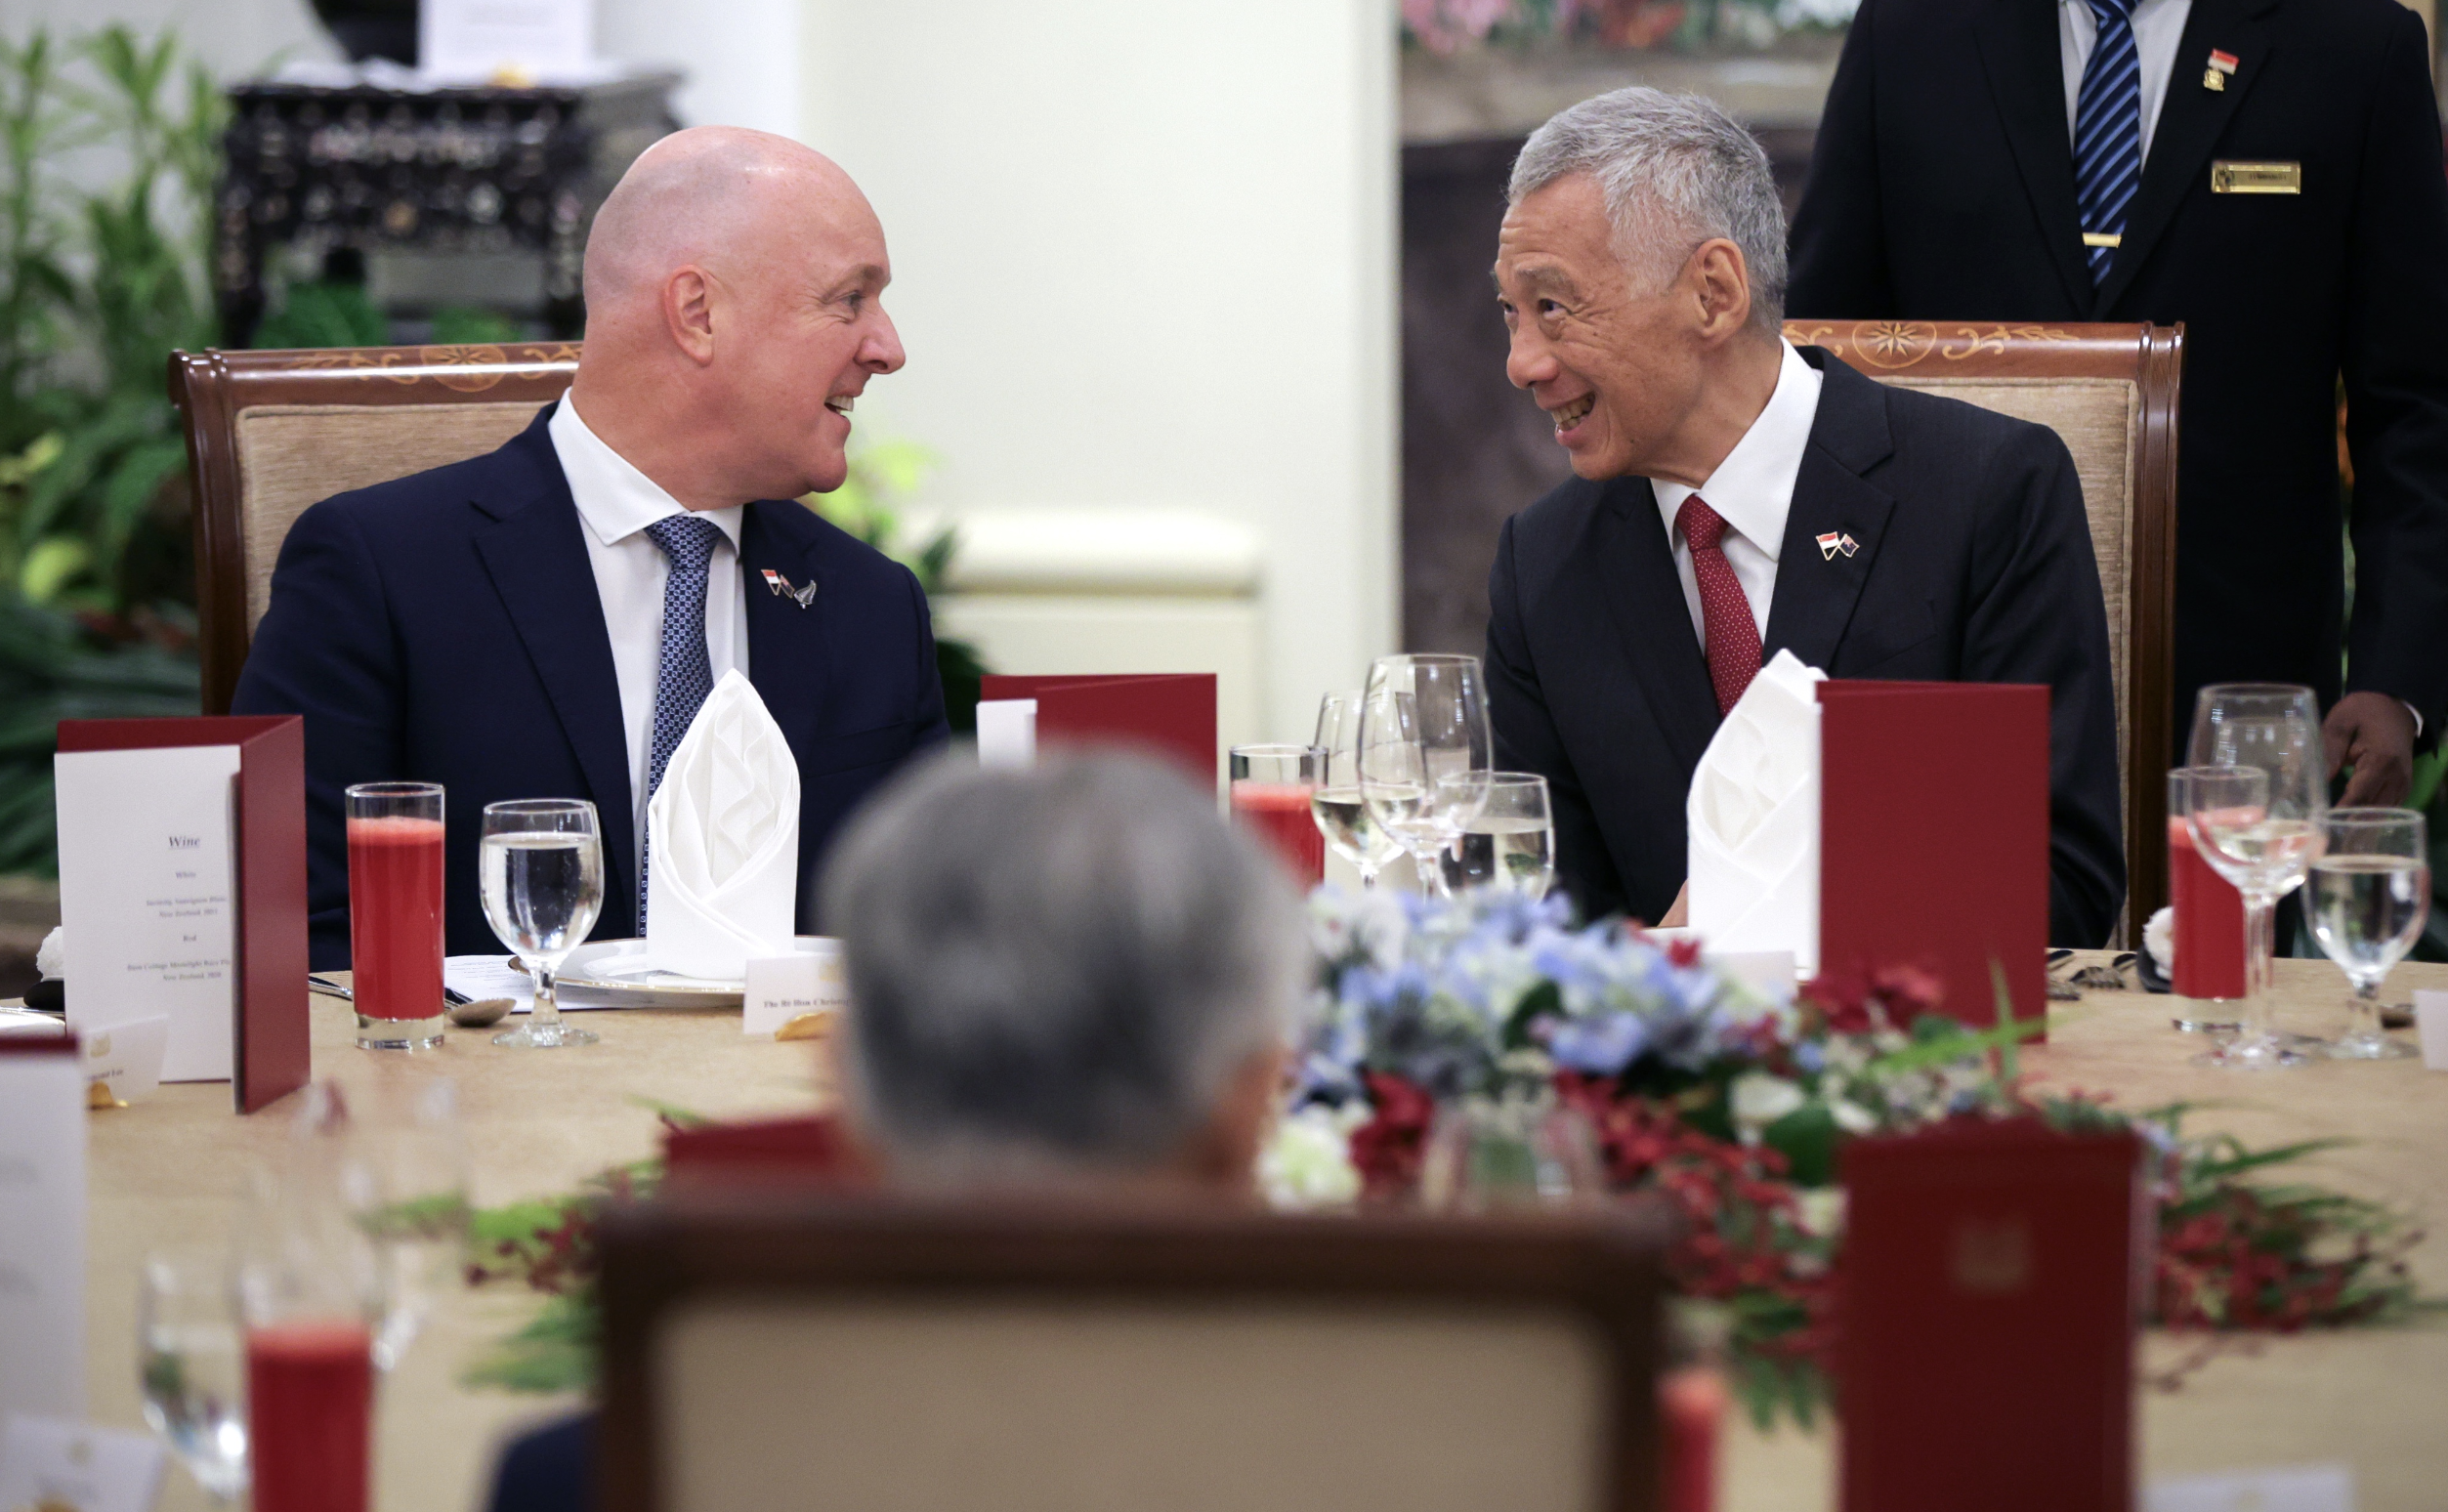 PM Lee and PM Luxon talking at a table.